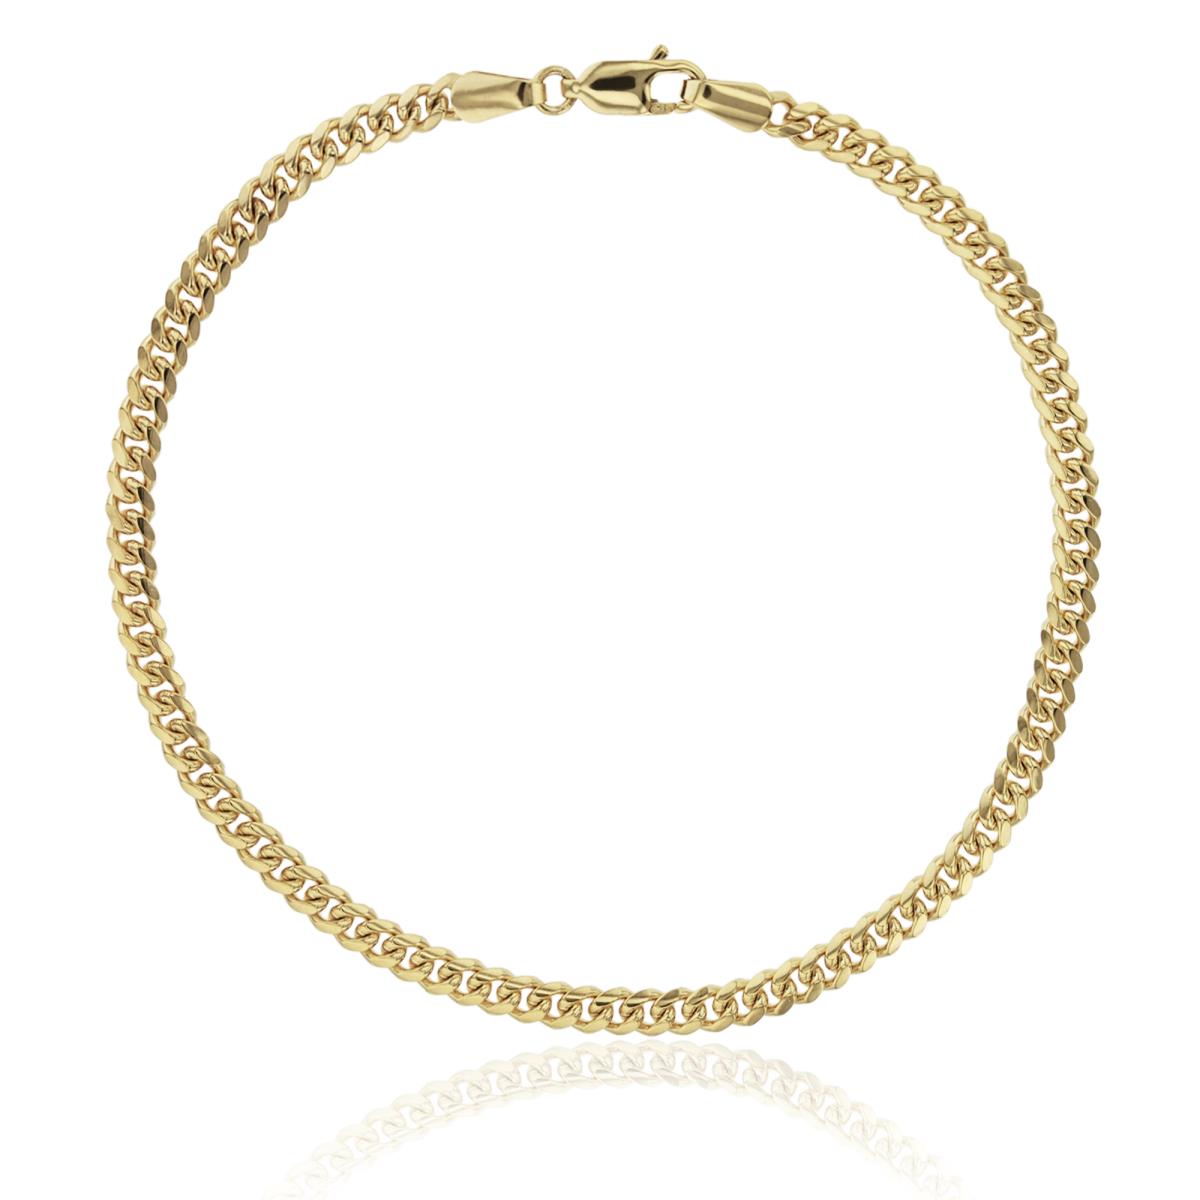 18K Yellow Gold 3.50mm 8.25" Solid Miami Cuban 100 Chain Bracelet with Lobster Lock